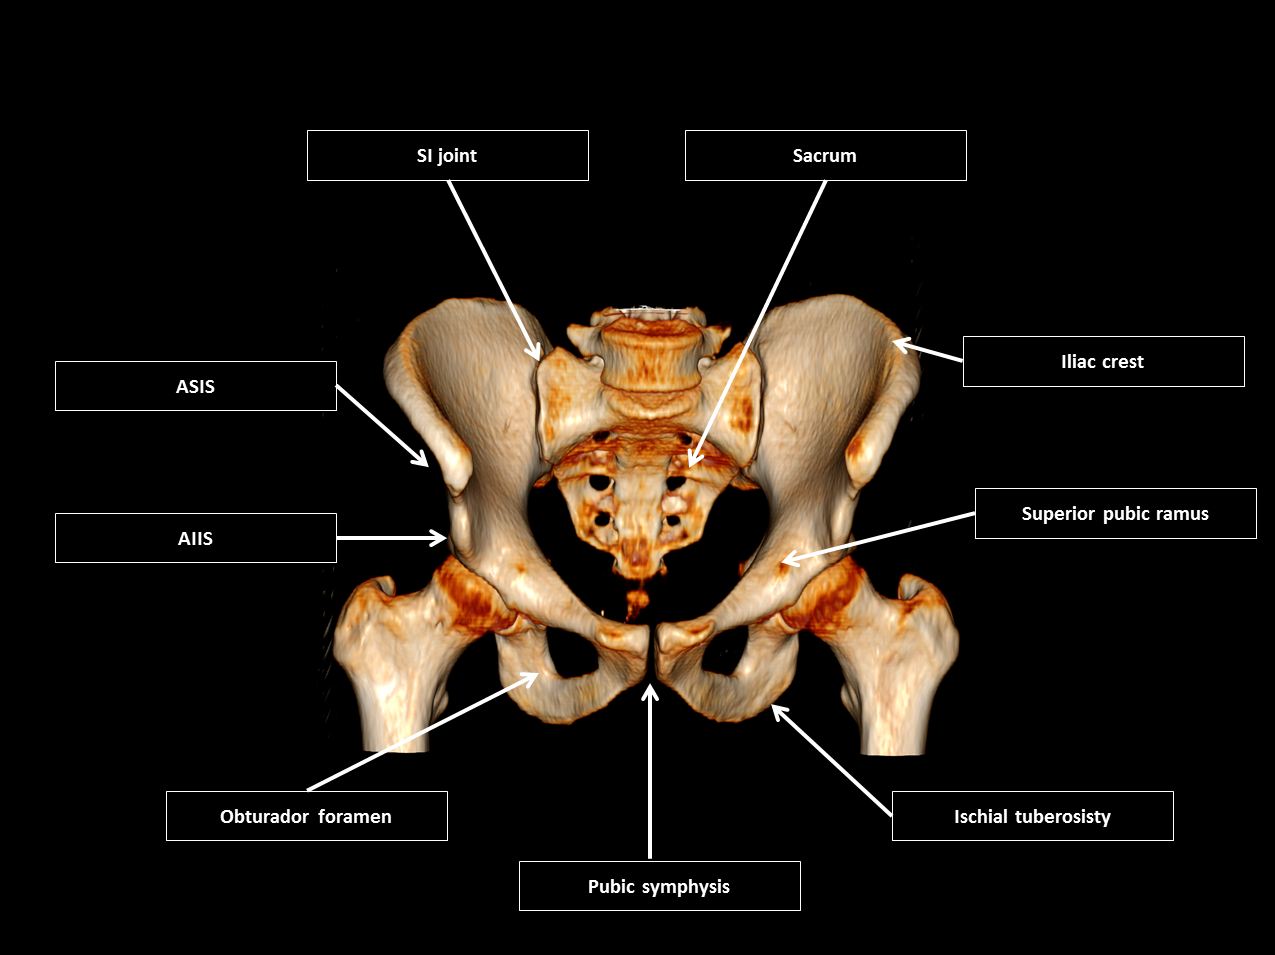 Pelvic insufficiency fractures | Radiology Reference Article |  Radiopaedia.org